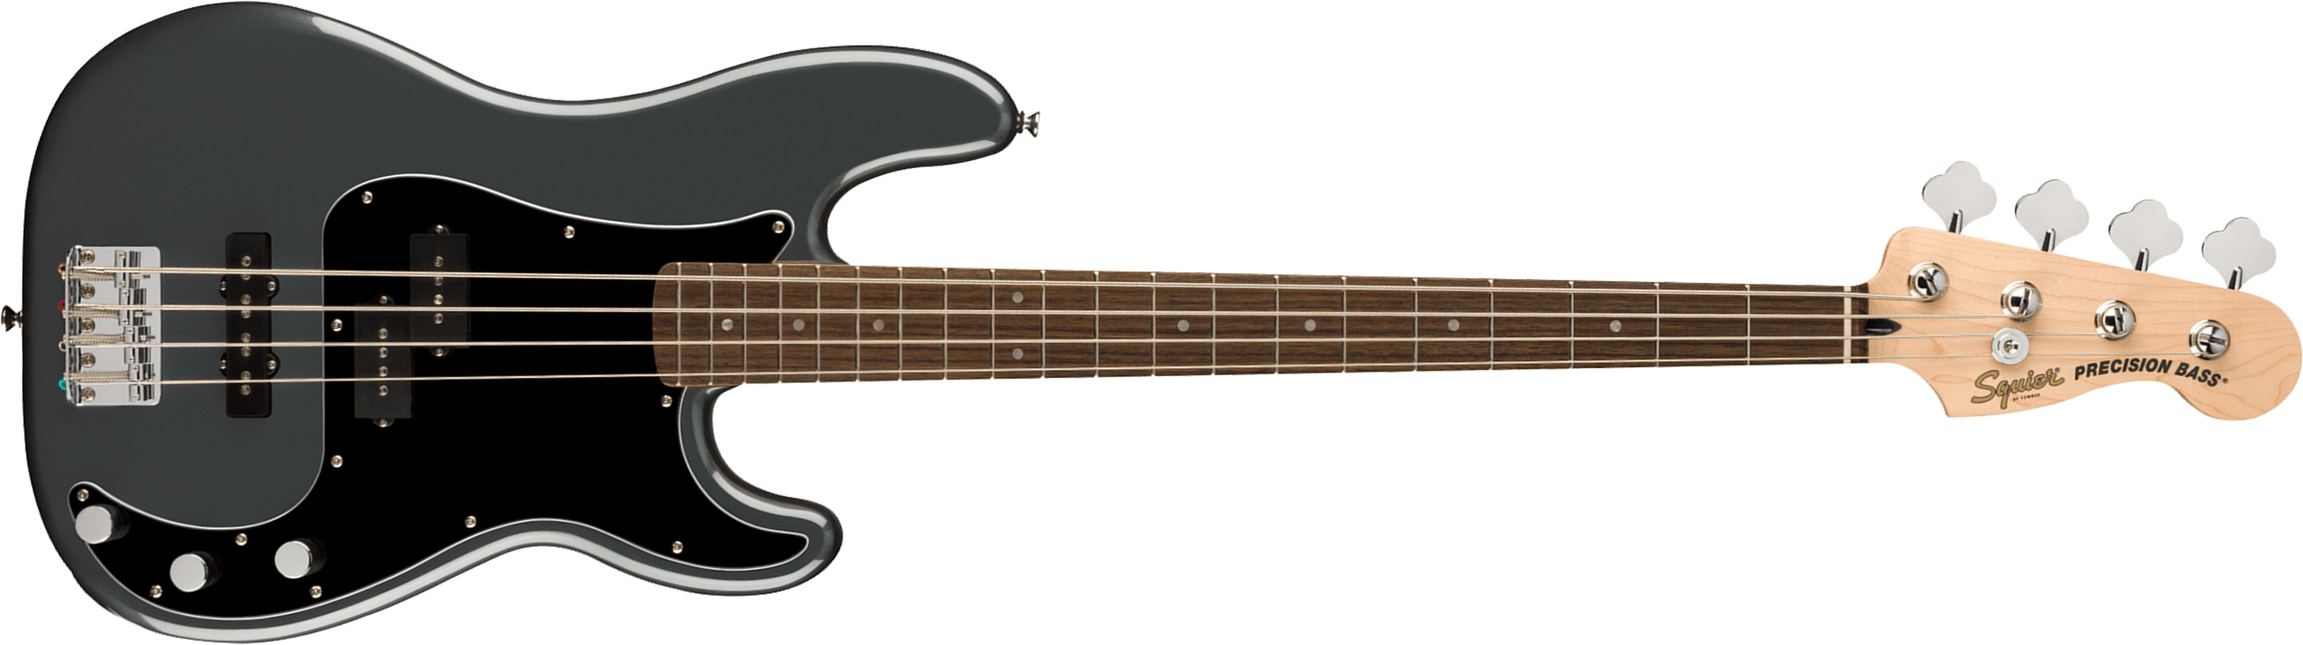 Squier Precision Bass Affinity Pj 2021 Lau - Charcoal Frost Metallic - Solid body elektrische bas - Main picture